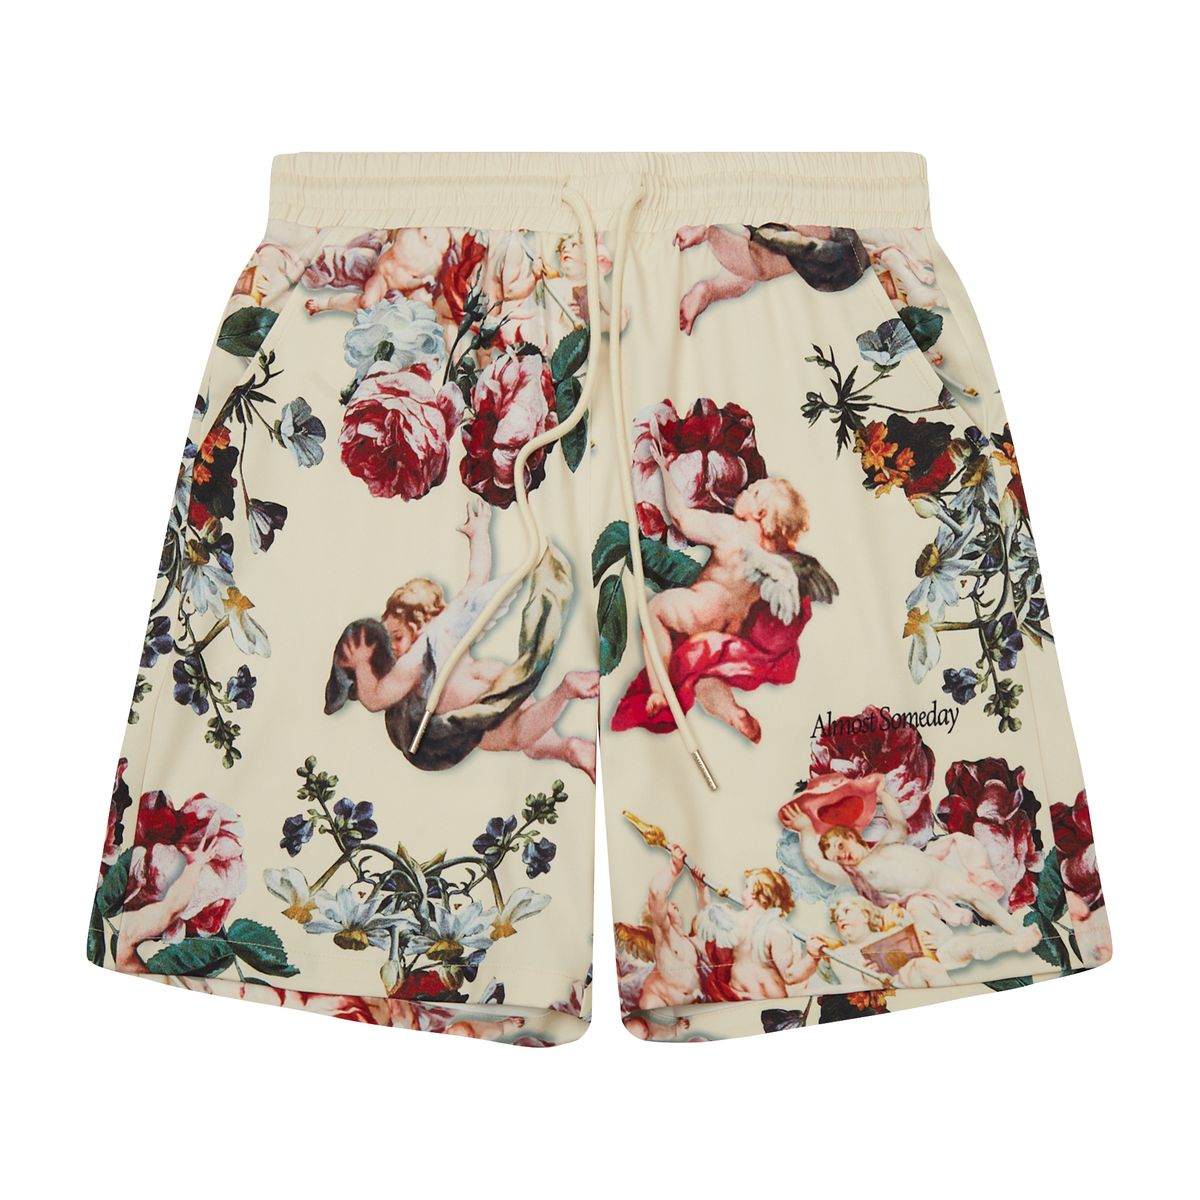 Almost Someday "ANGELS SHORTS"